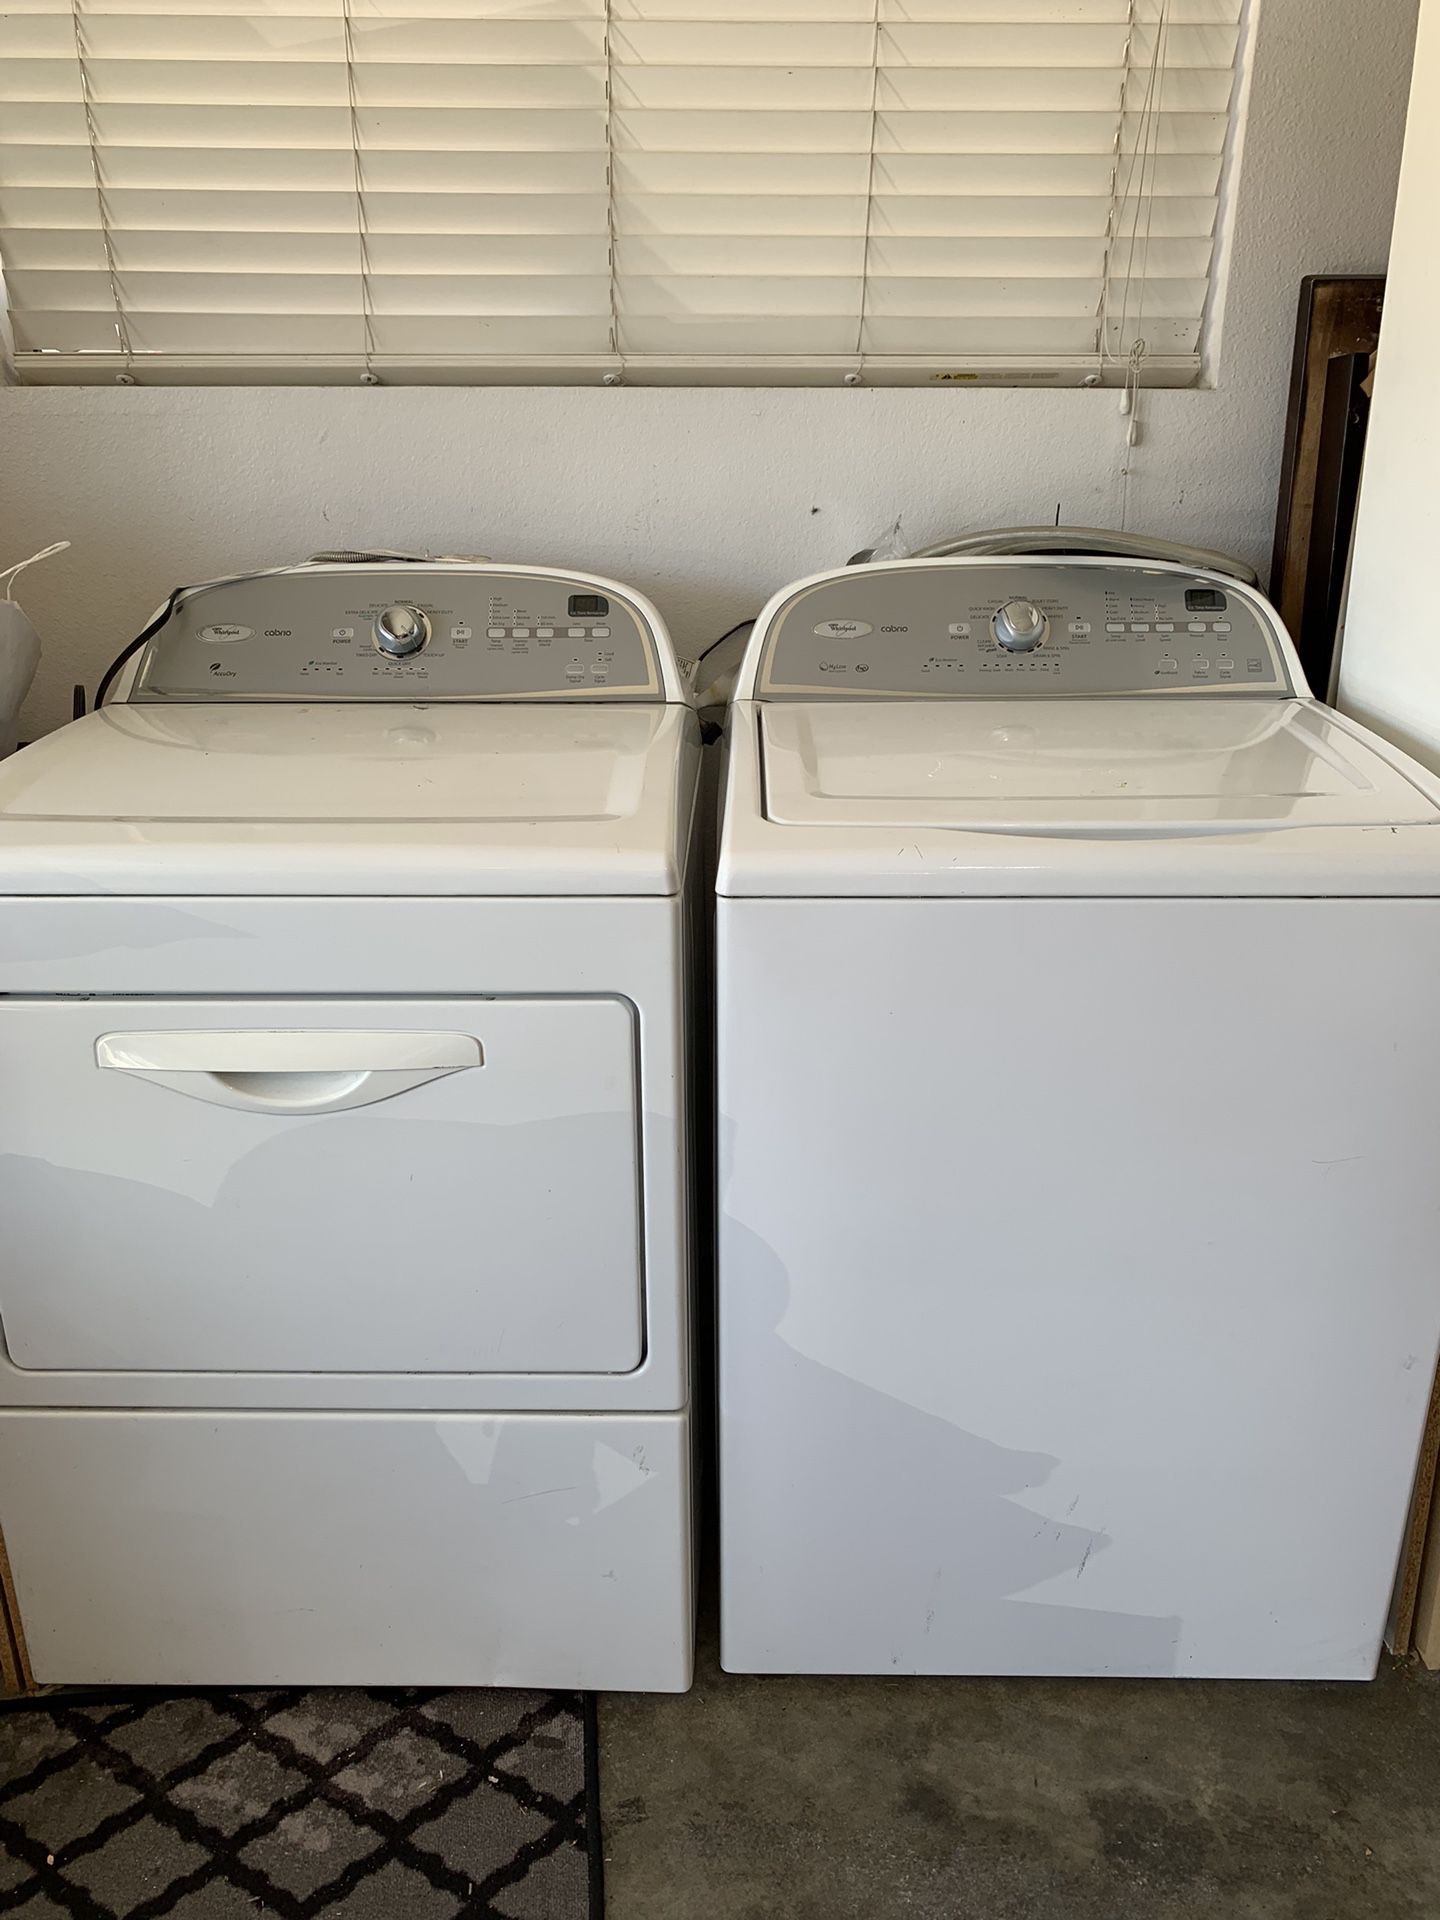 Washer/dryer Set For $400